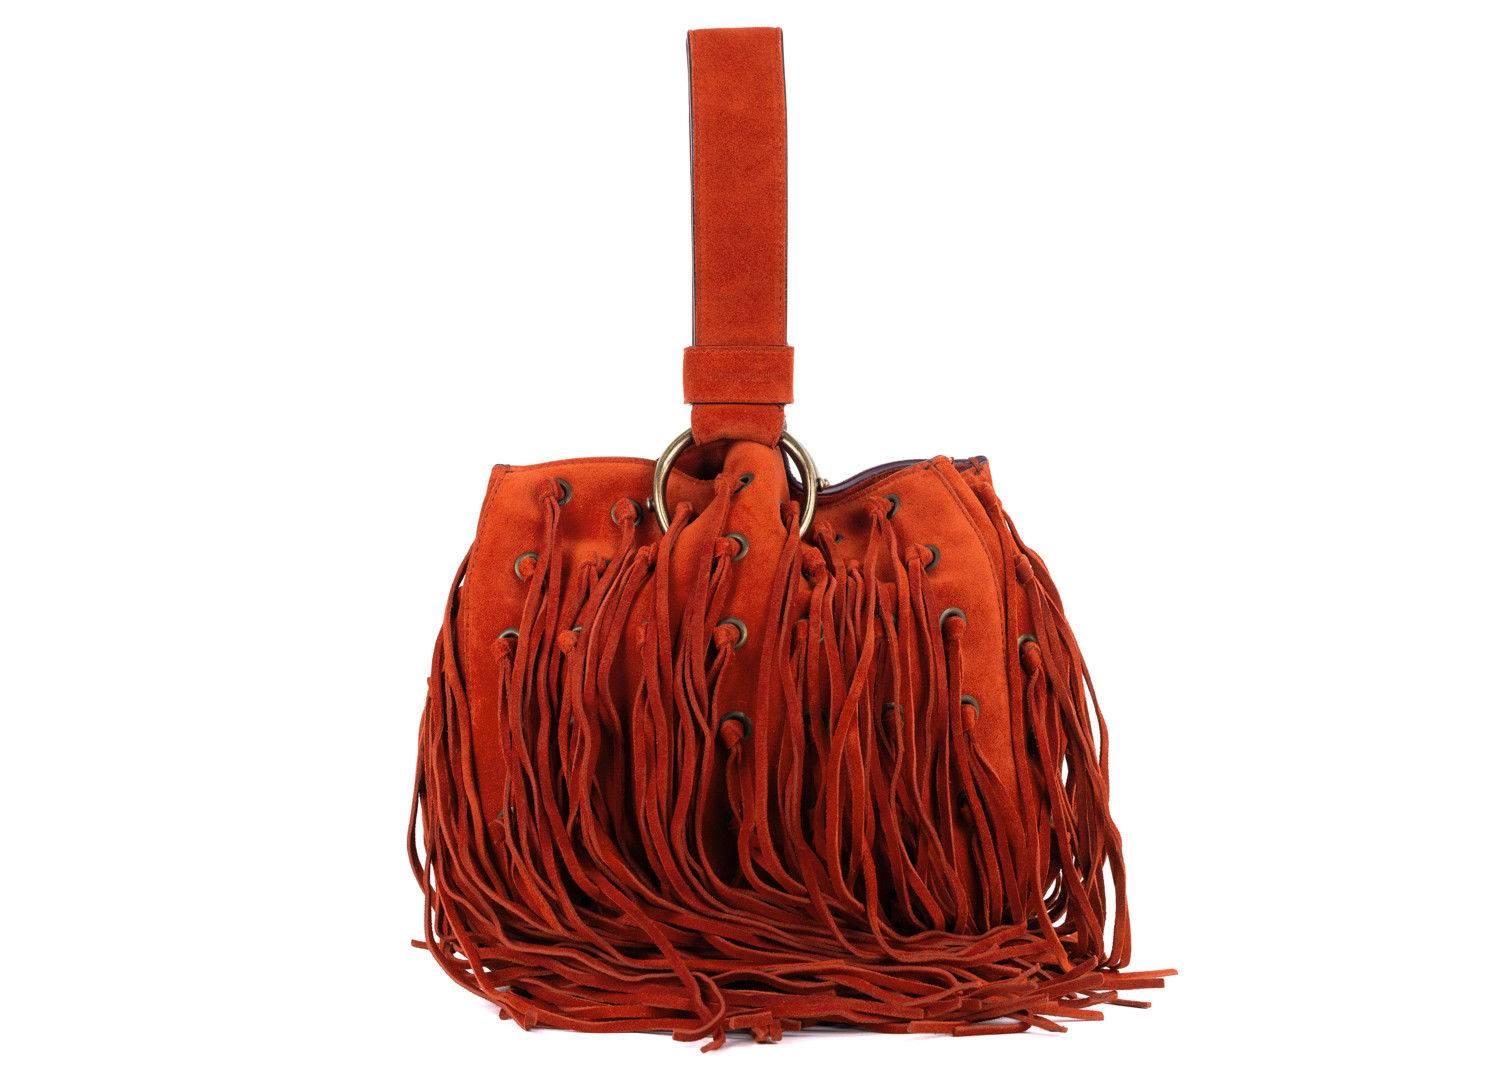 Roberto Cavalli Orange Suede Eyelet Fringe Wristlet Bucket Bag In New Condition For Sale In Brooklyn, NY